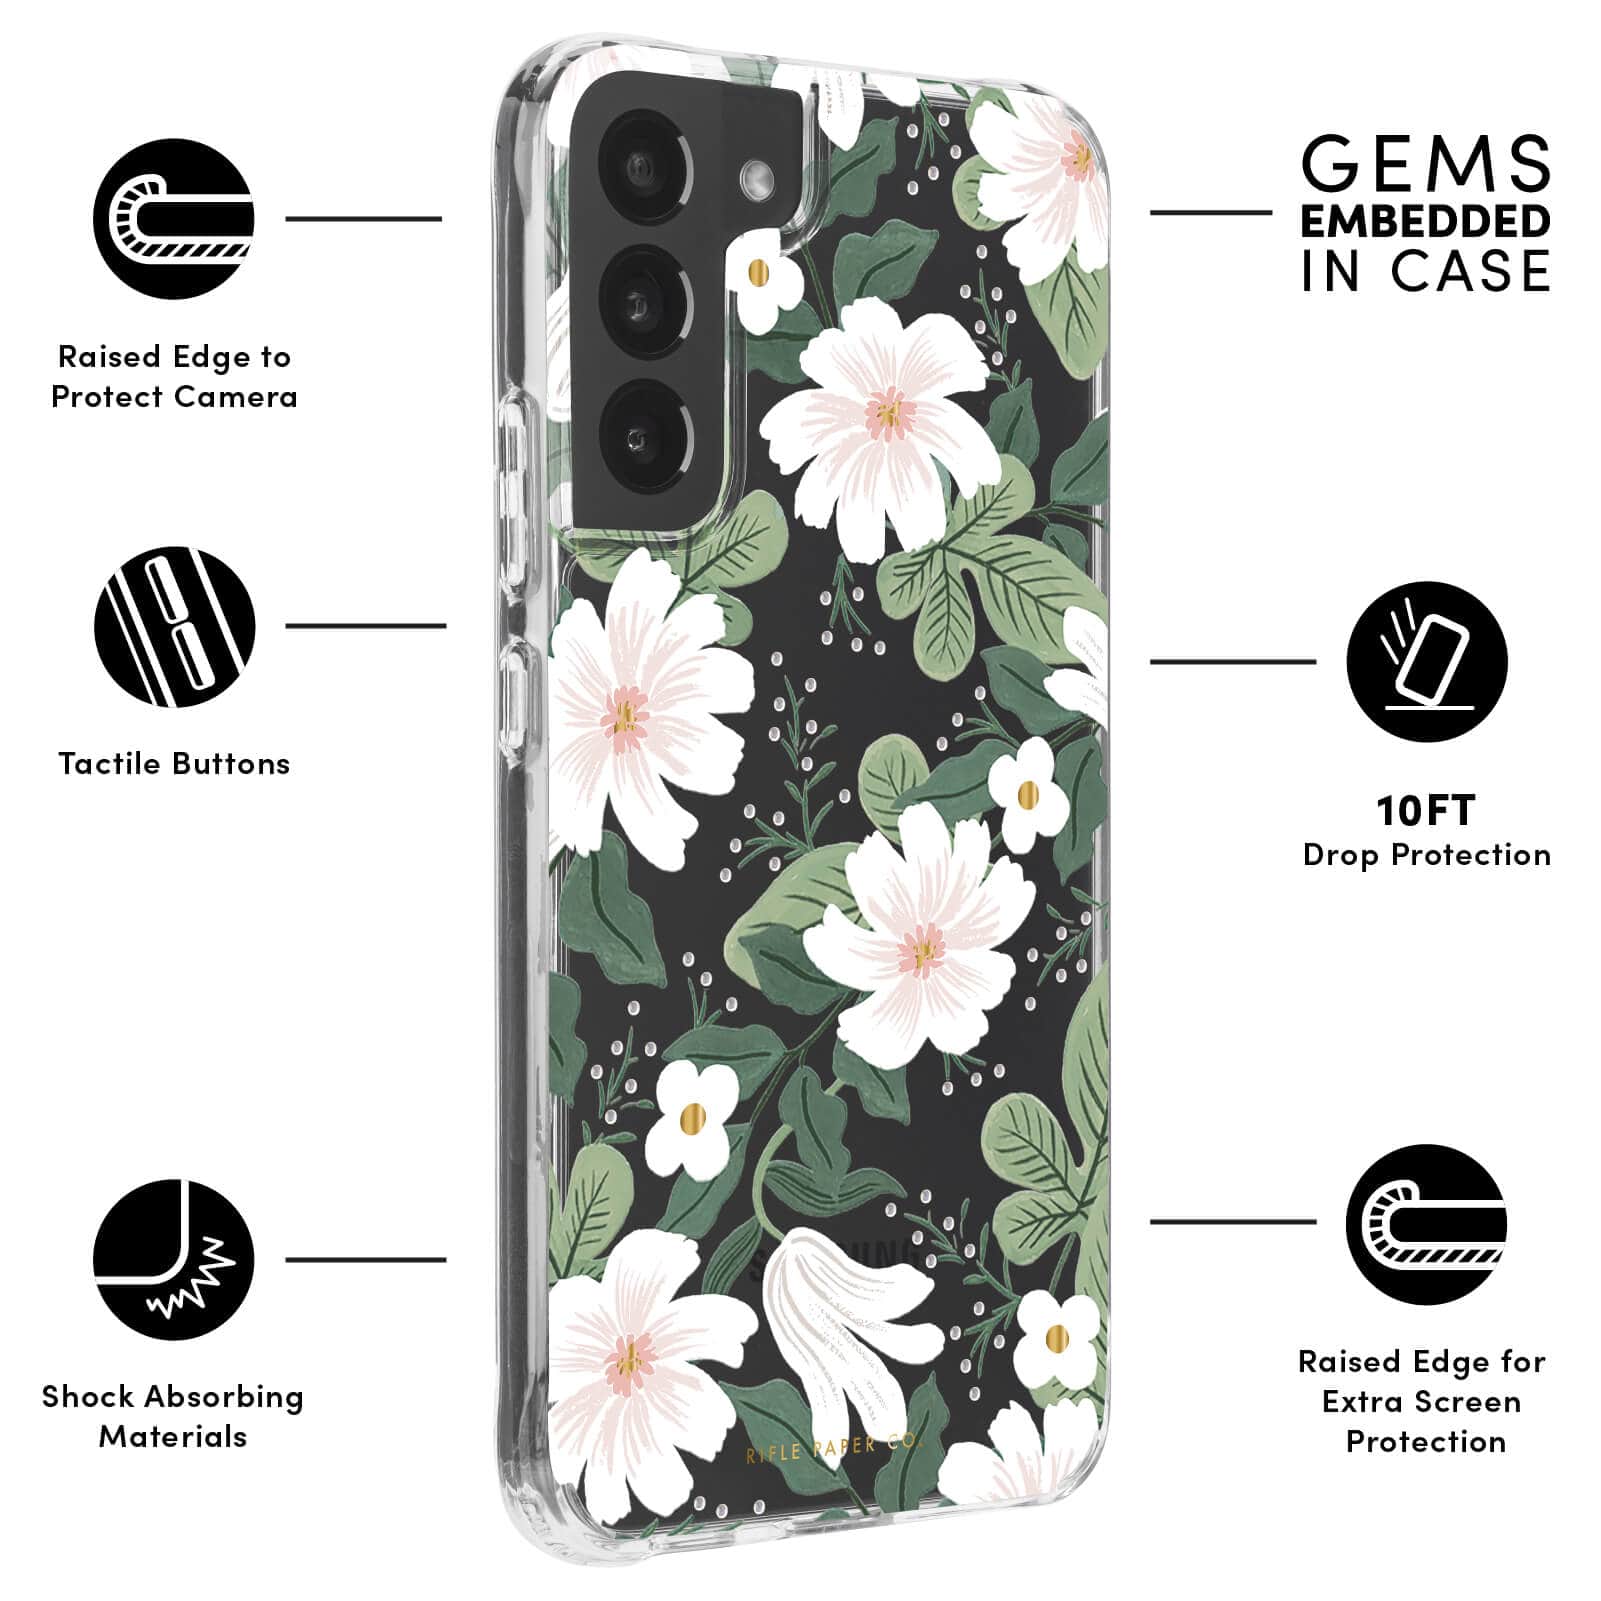 FEATURES: RAISED EDGE TO PROTECT CAMERA, TACTILE BUTTONS, SHOCK ABSORBING MATERIALS, GEMS EMBEDDED IN CASE, 10FT DROP PROTECTION, RAISED EDGE FOR EXTRA SCREEN PROTECTION. COLOR::WILLOW